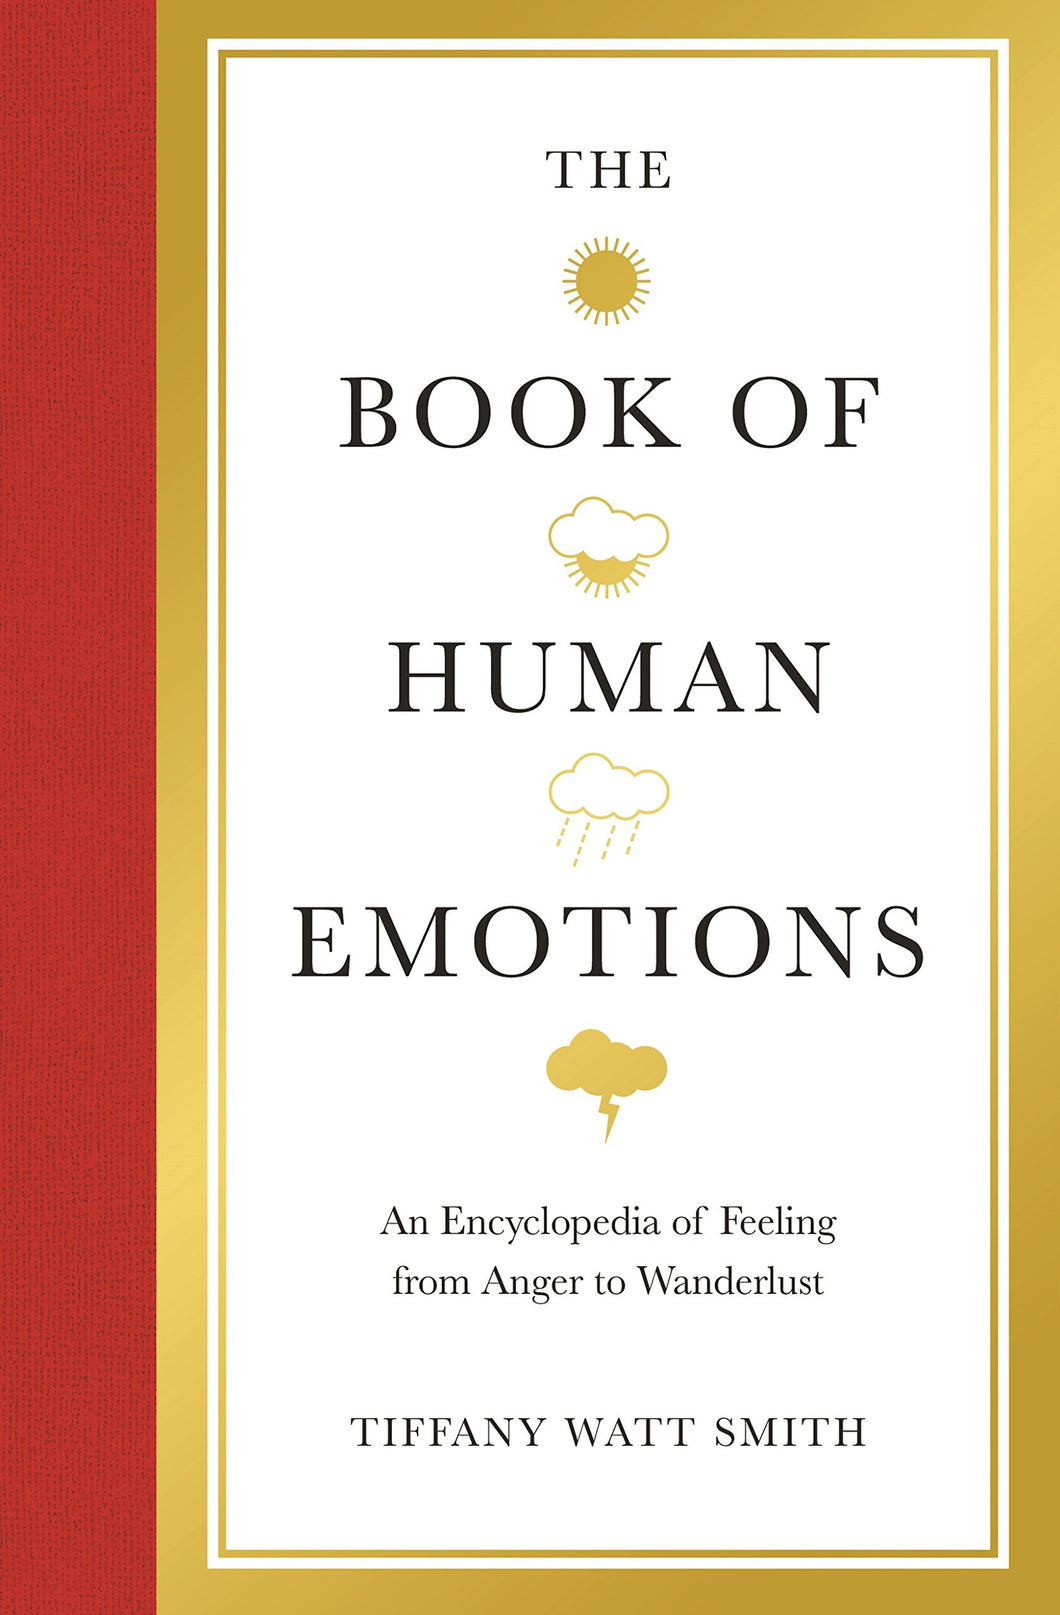 The Book of Human Emotions: An Encyclopedia of Feeling from Anger to Wanderlust (Wellcome)